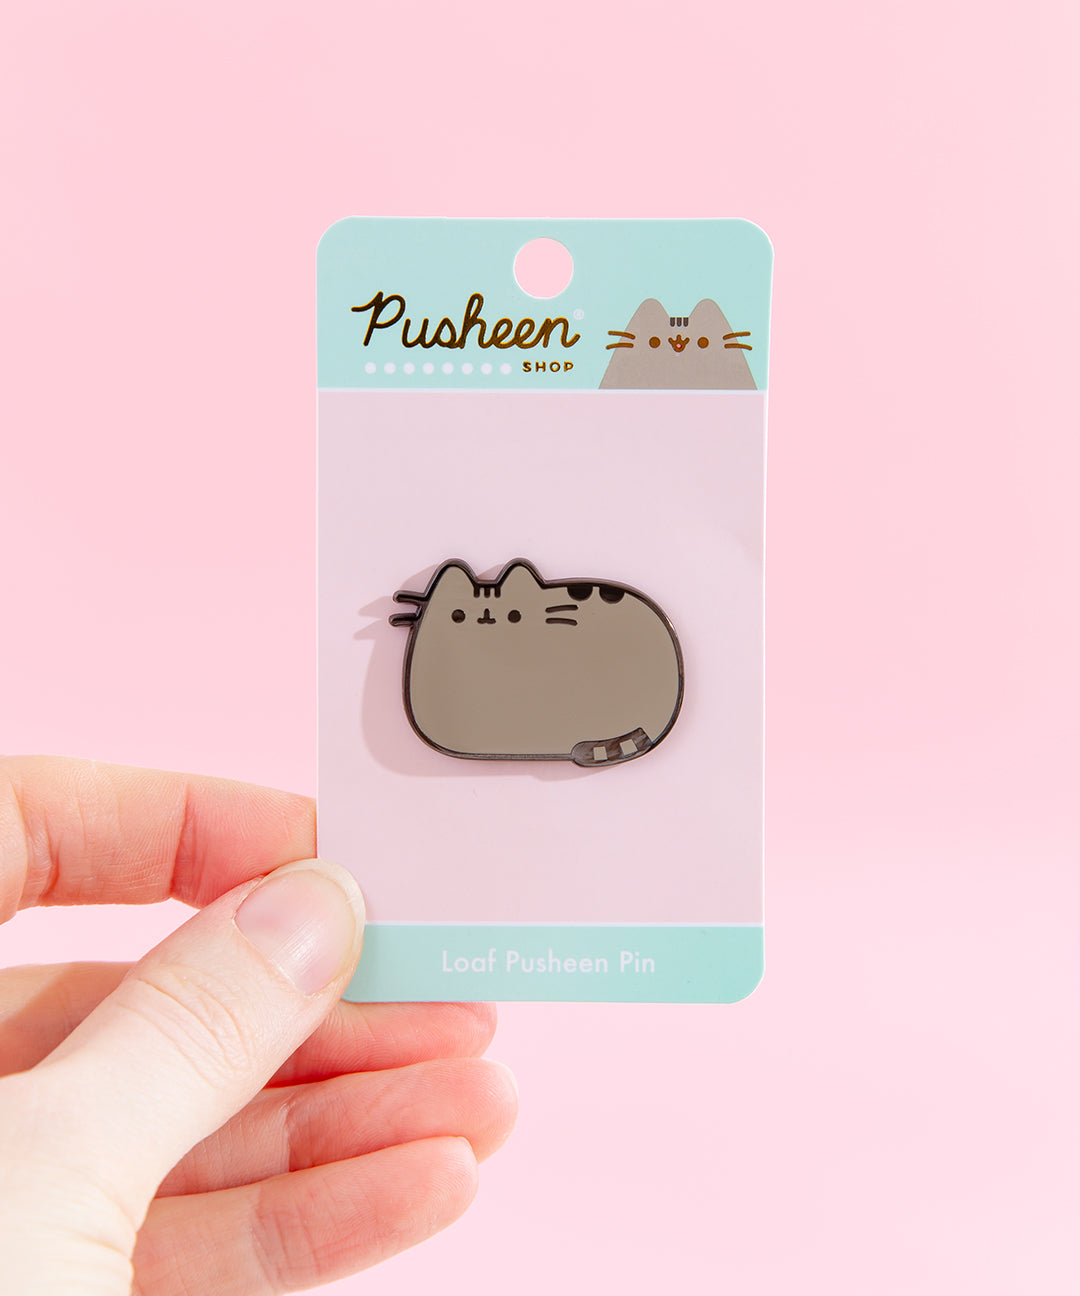 Best Selling Shopify Products on shop.pusheen.com-1